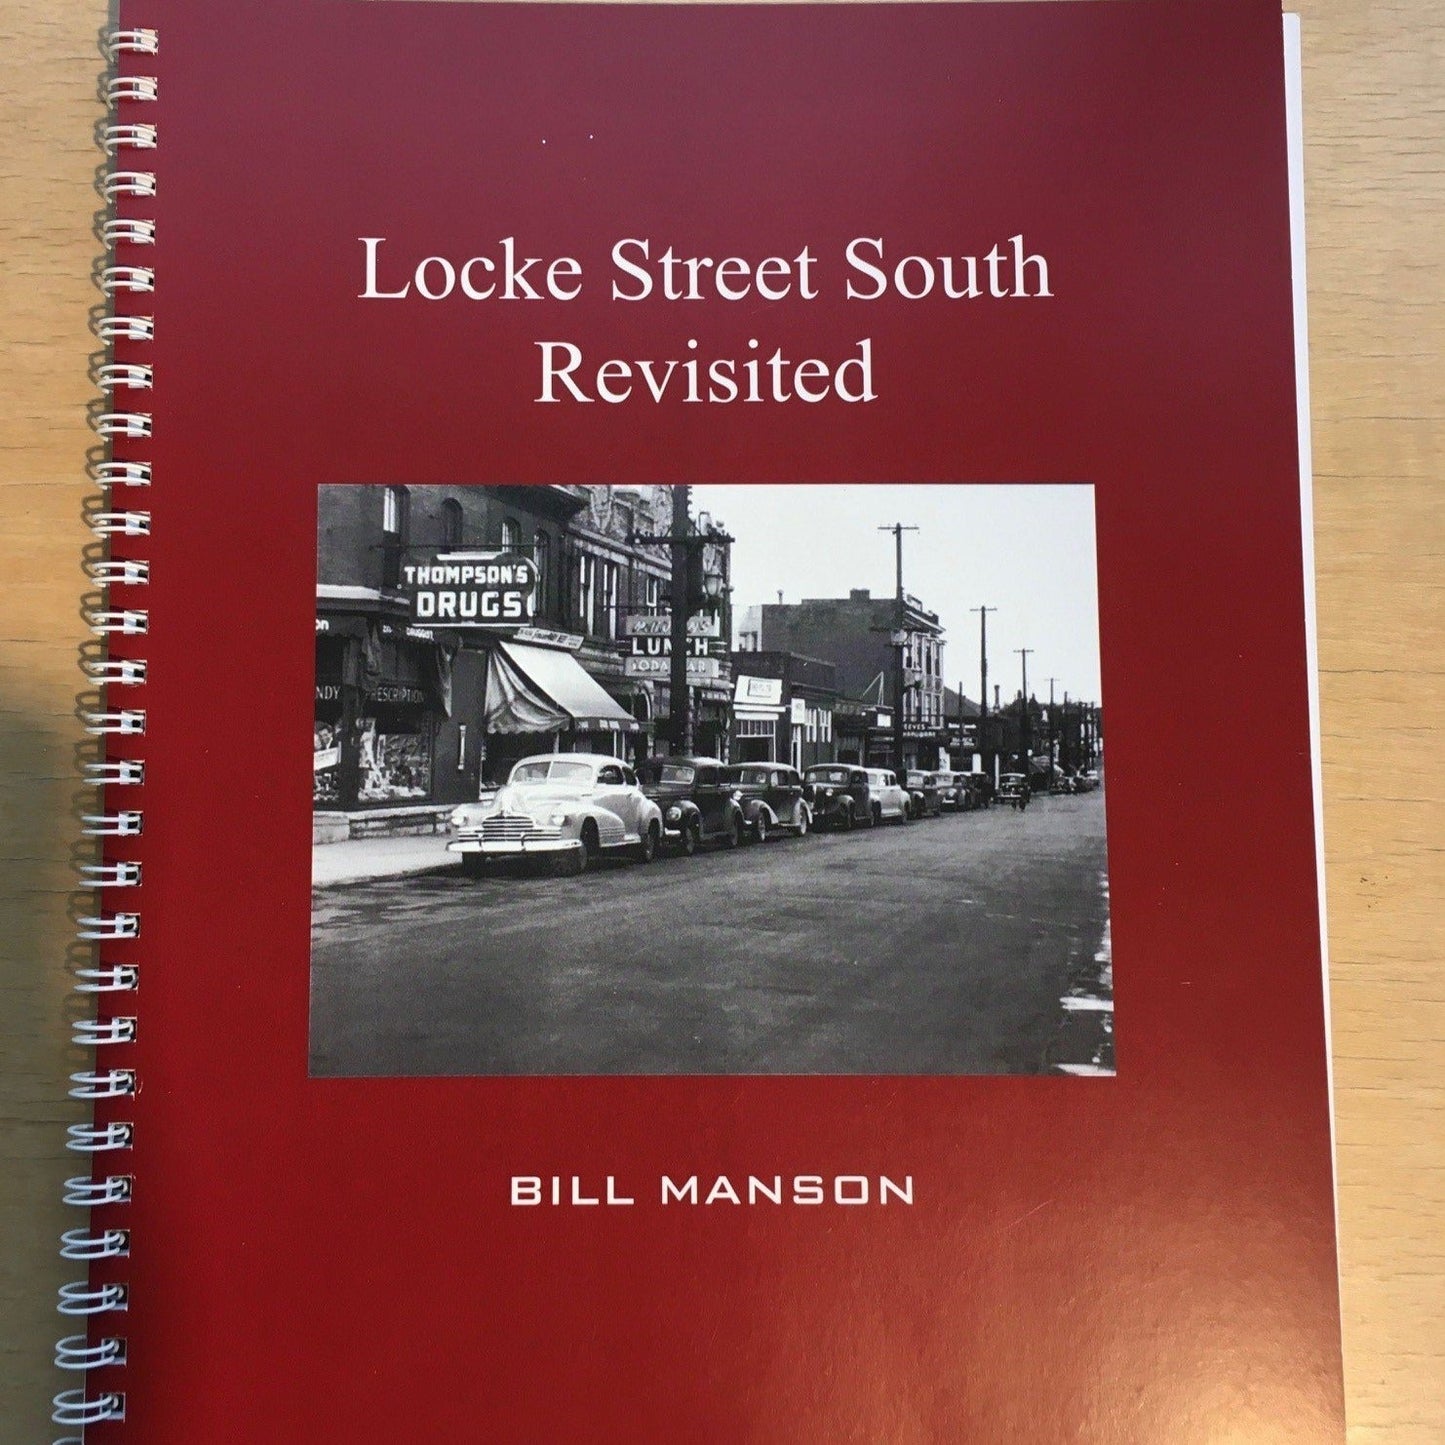 Locke Street South Revisited